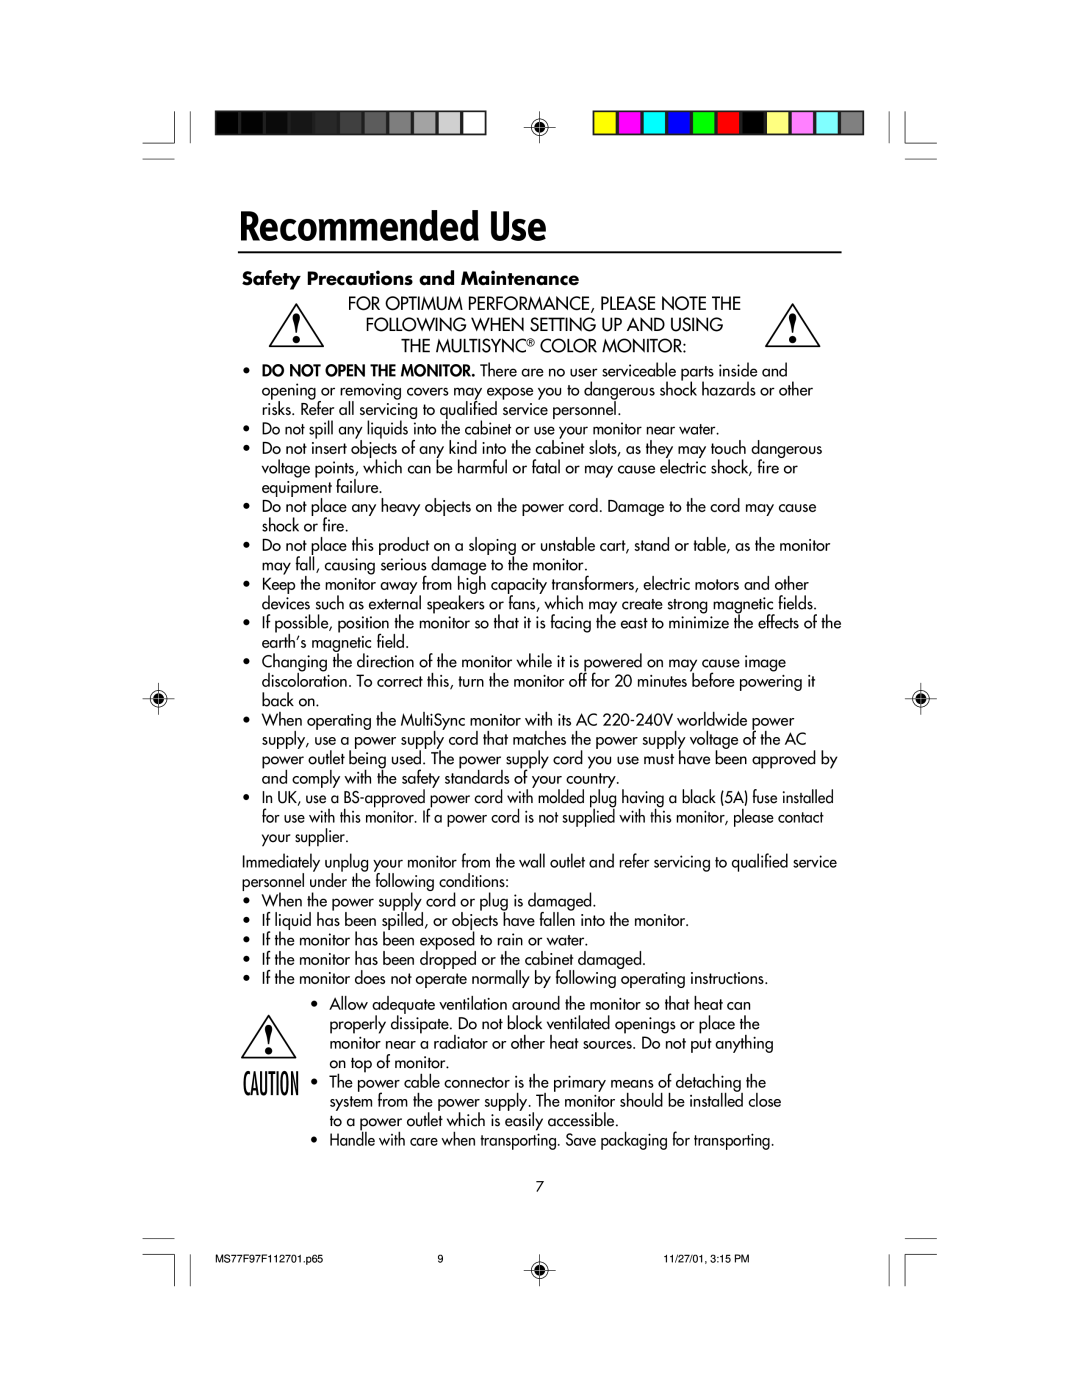 NEC 77F, 97F manual Recommended Use, Safety Precautions and Maintenance 